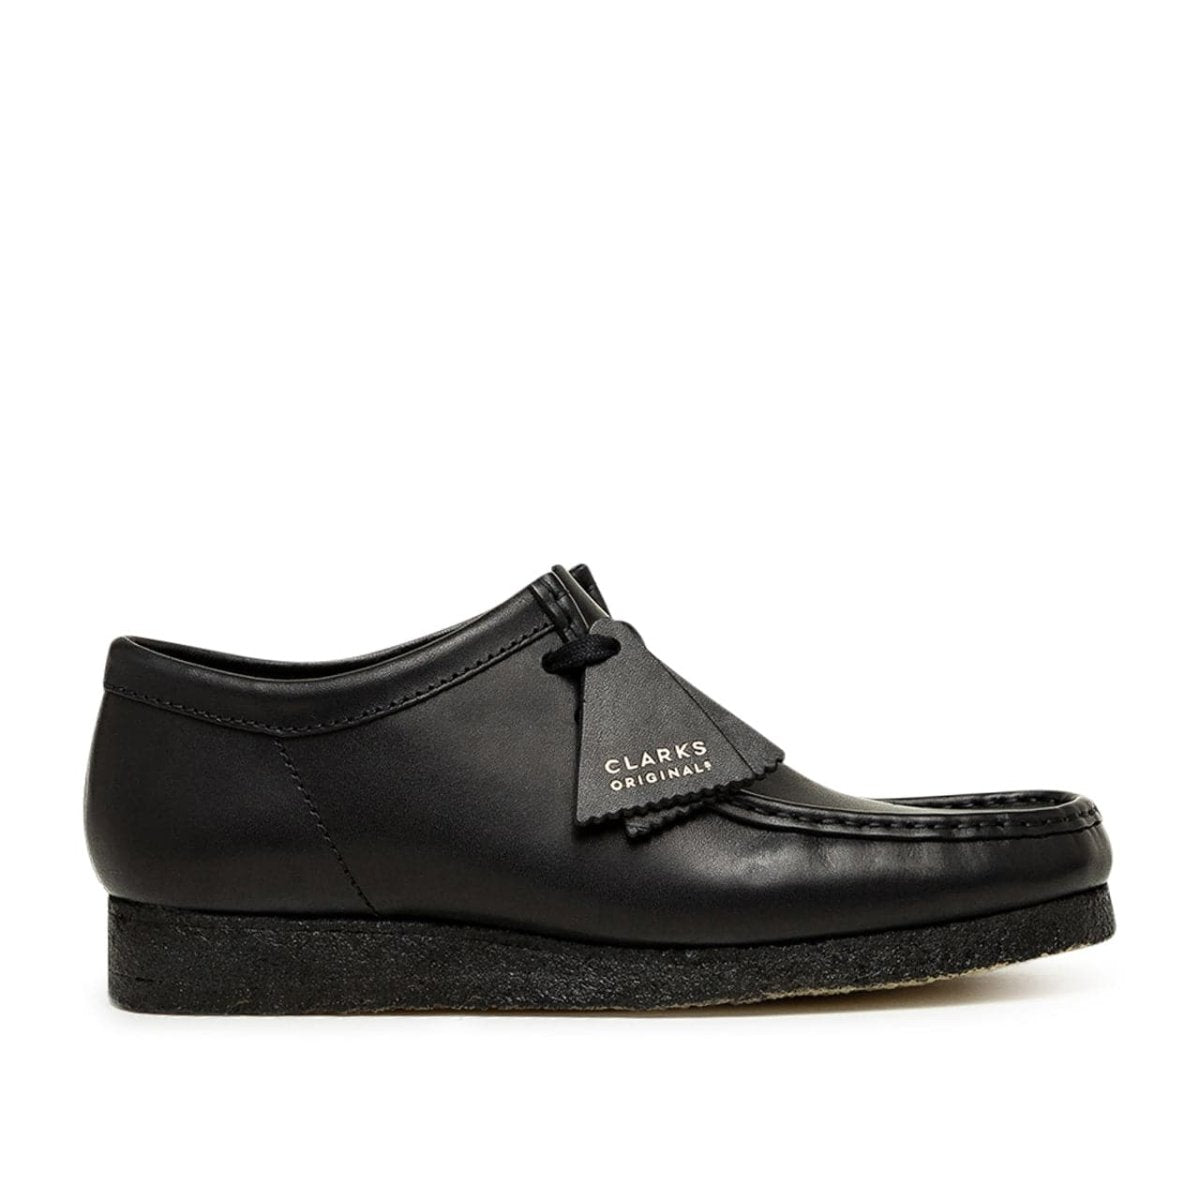 Image of Clarks Originals Wallabee Boot Black Leather (Black)